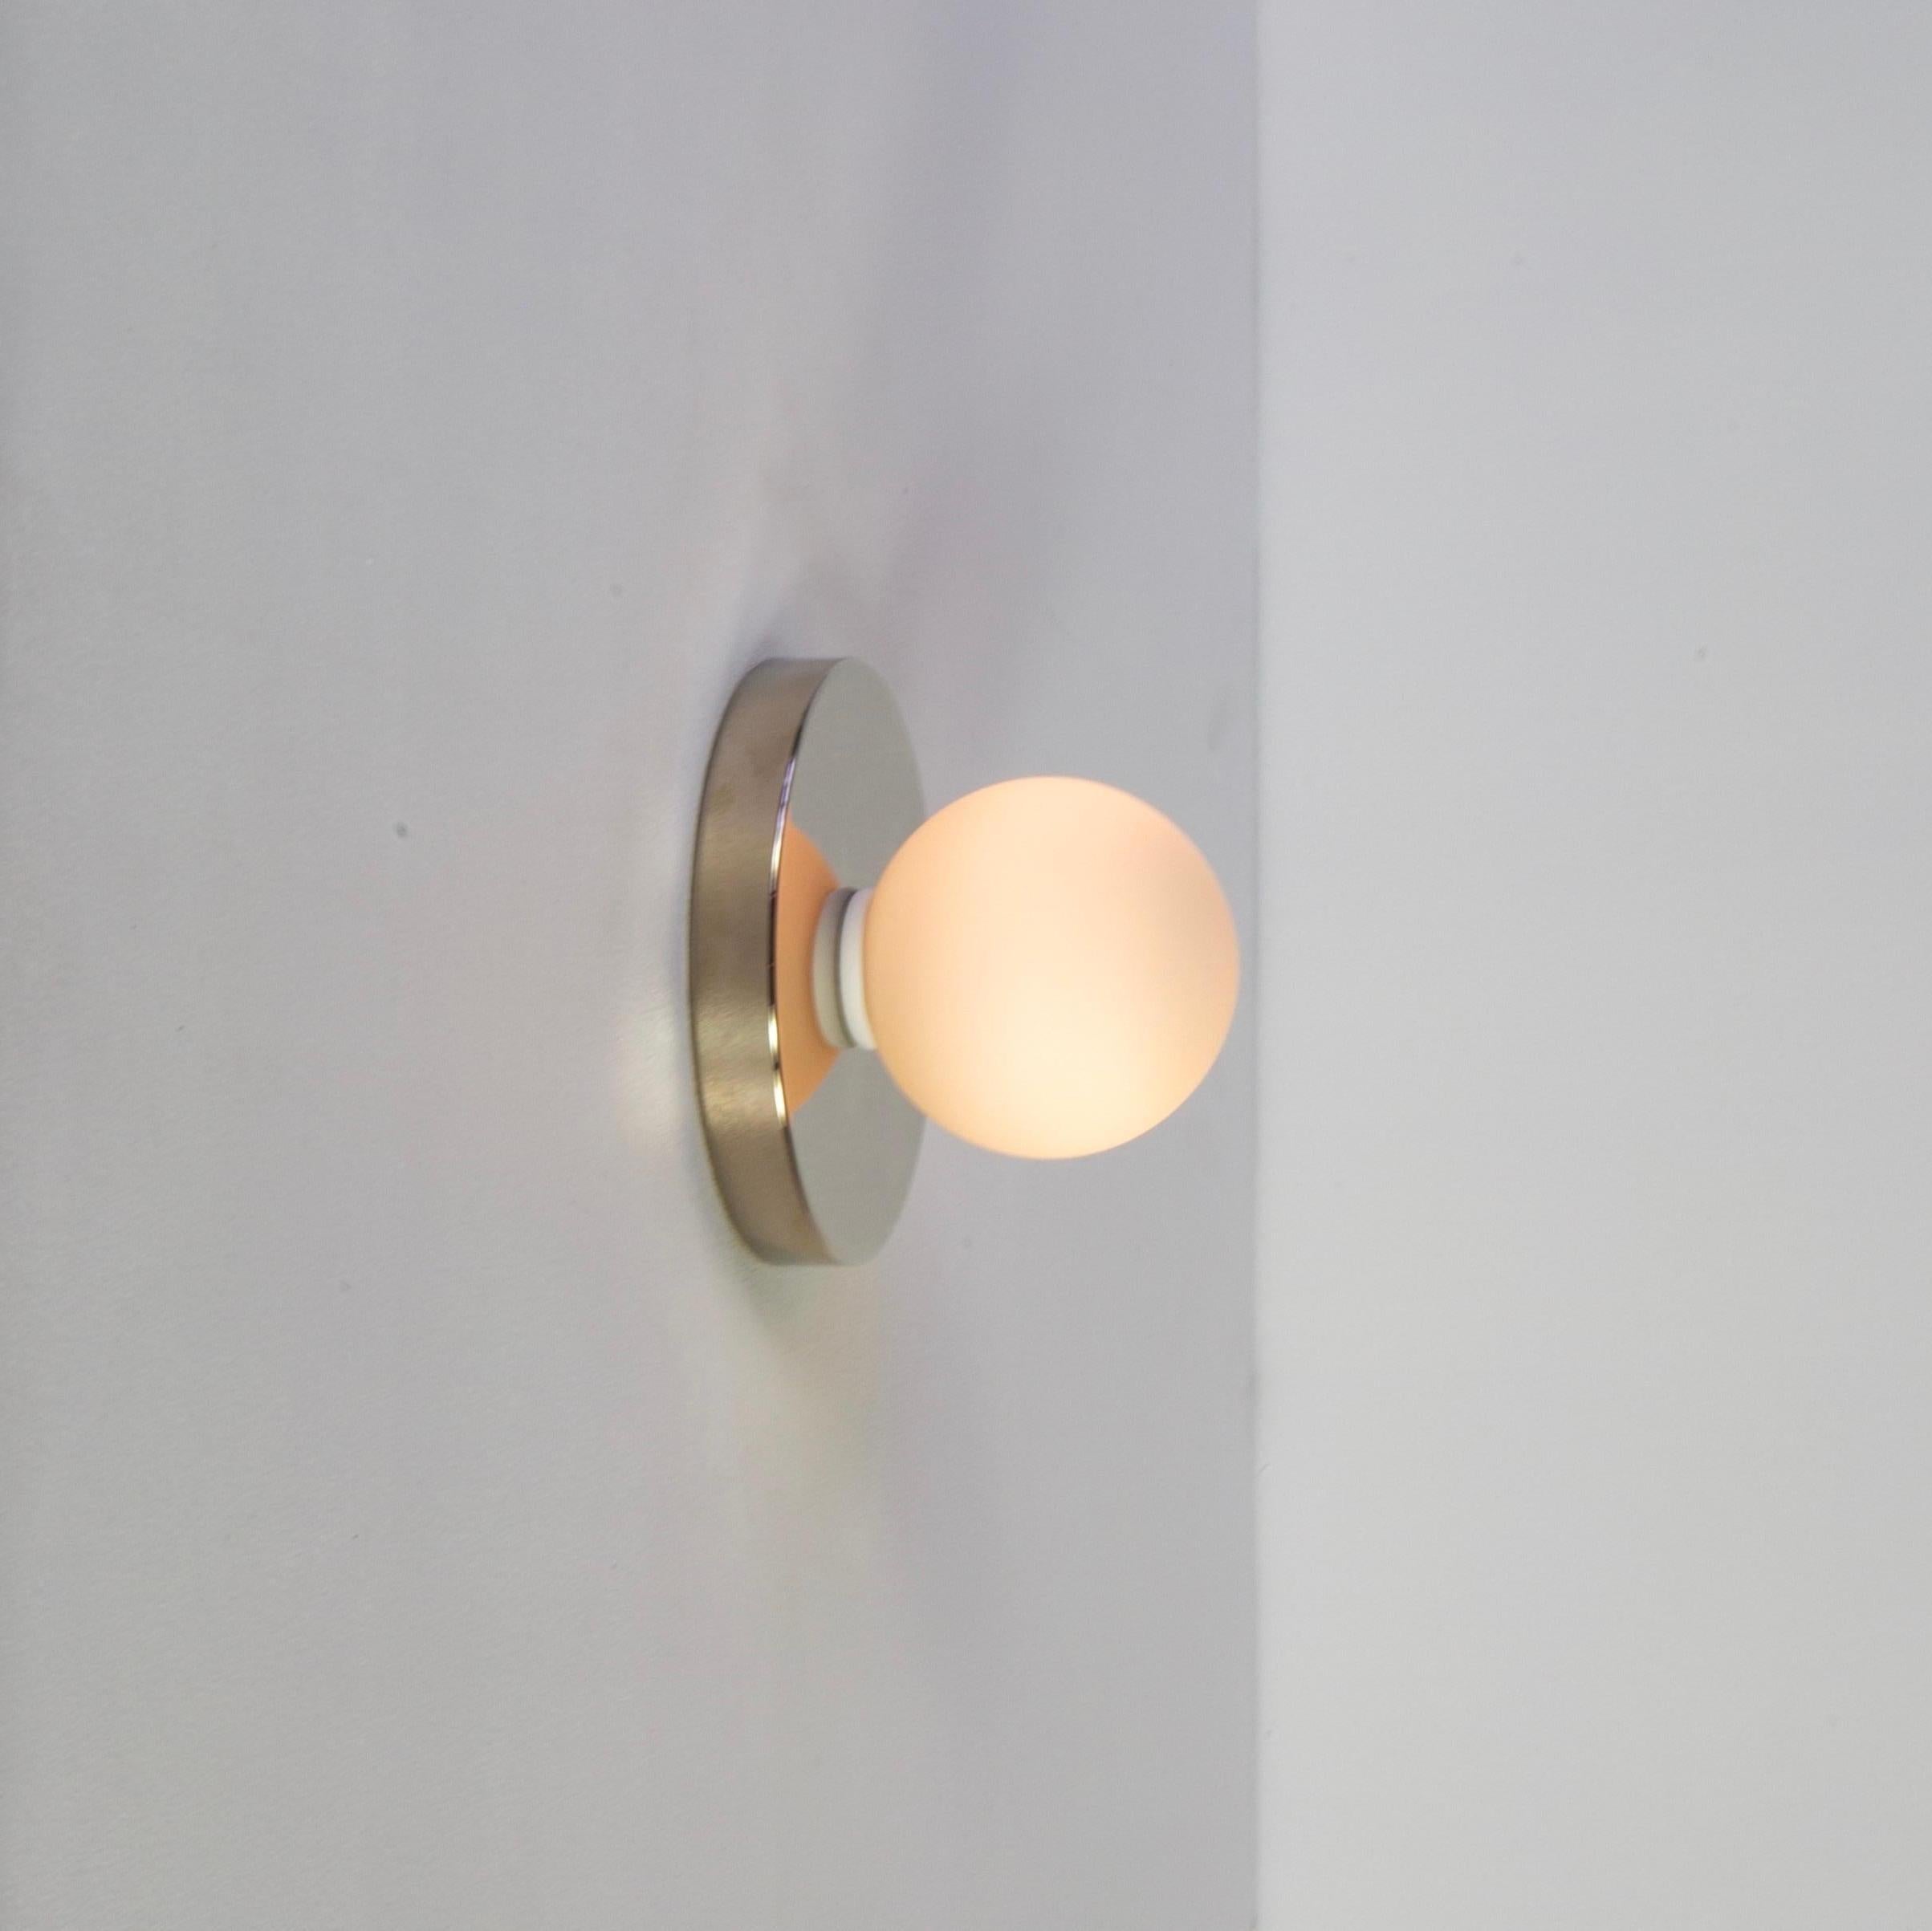 Plated Globe Sconce by Research.Lighting, Polished Nickel, Made to Order For Sale